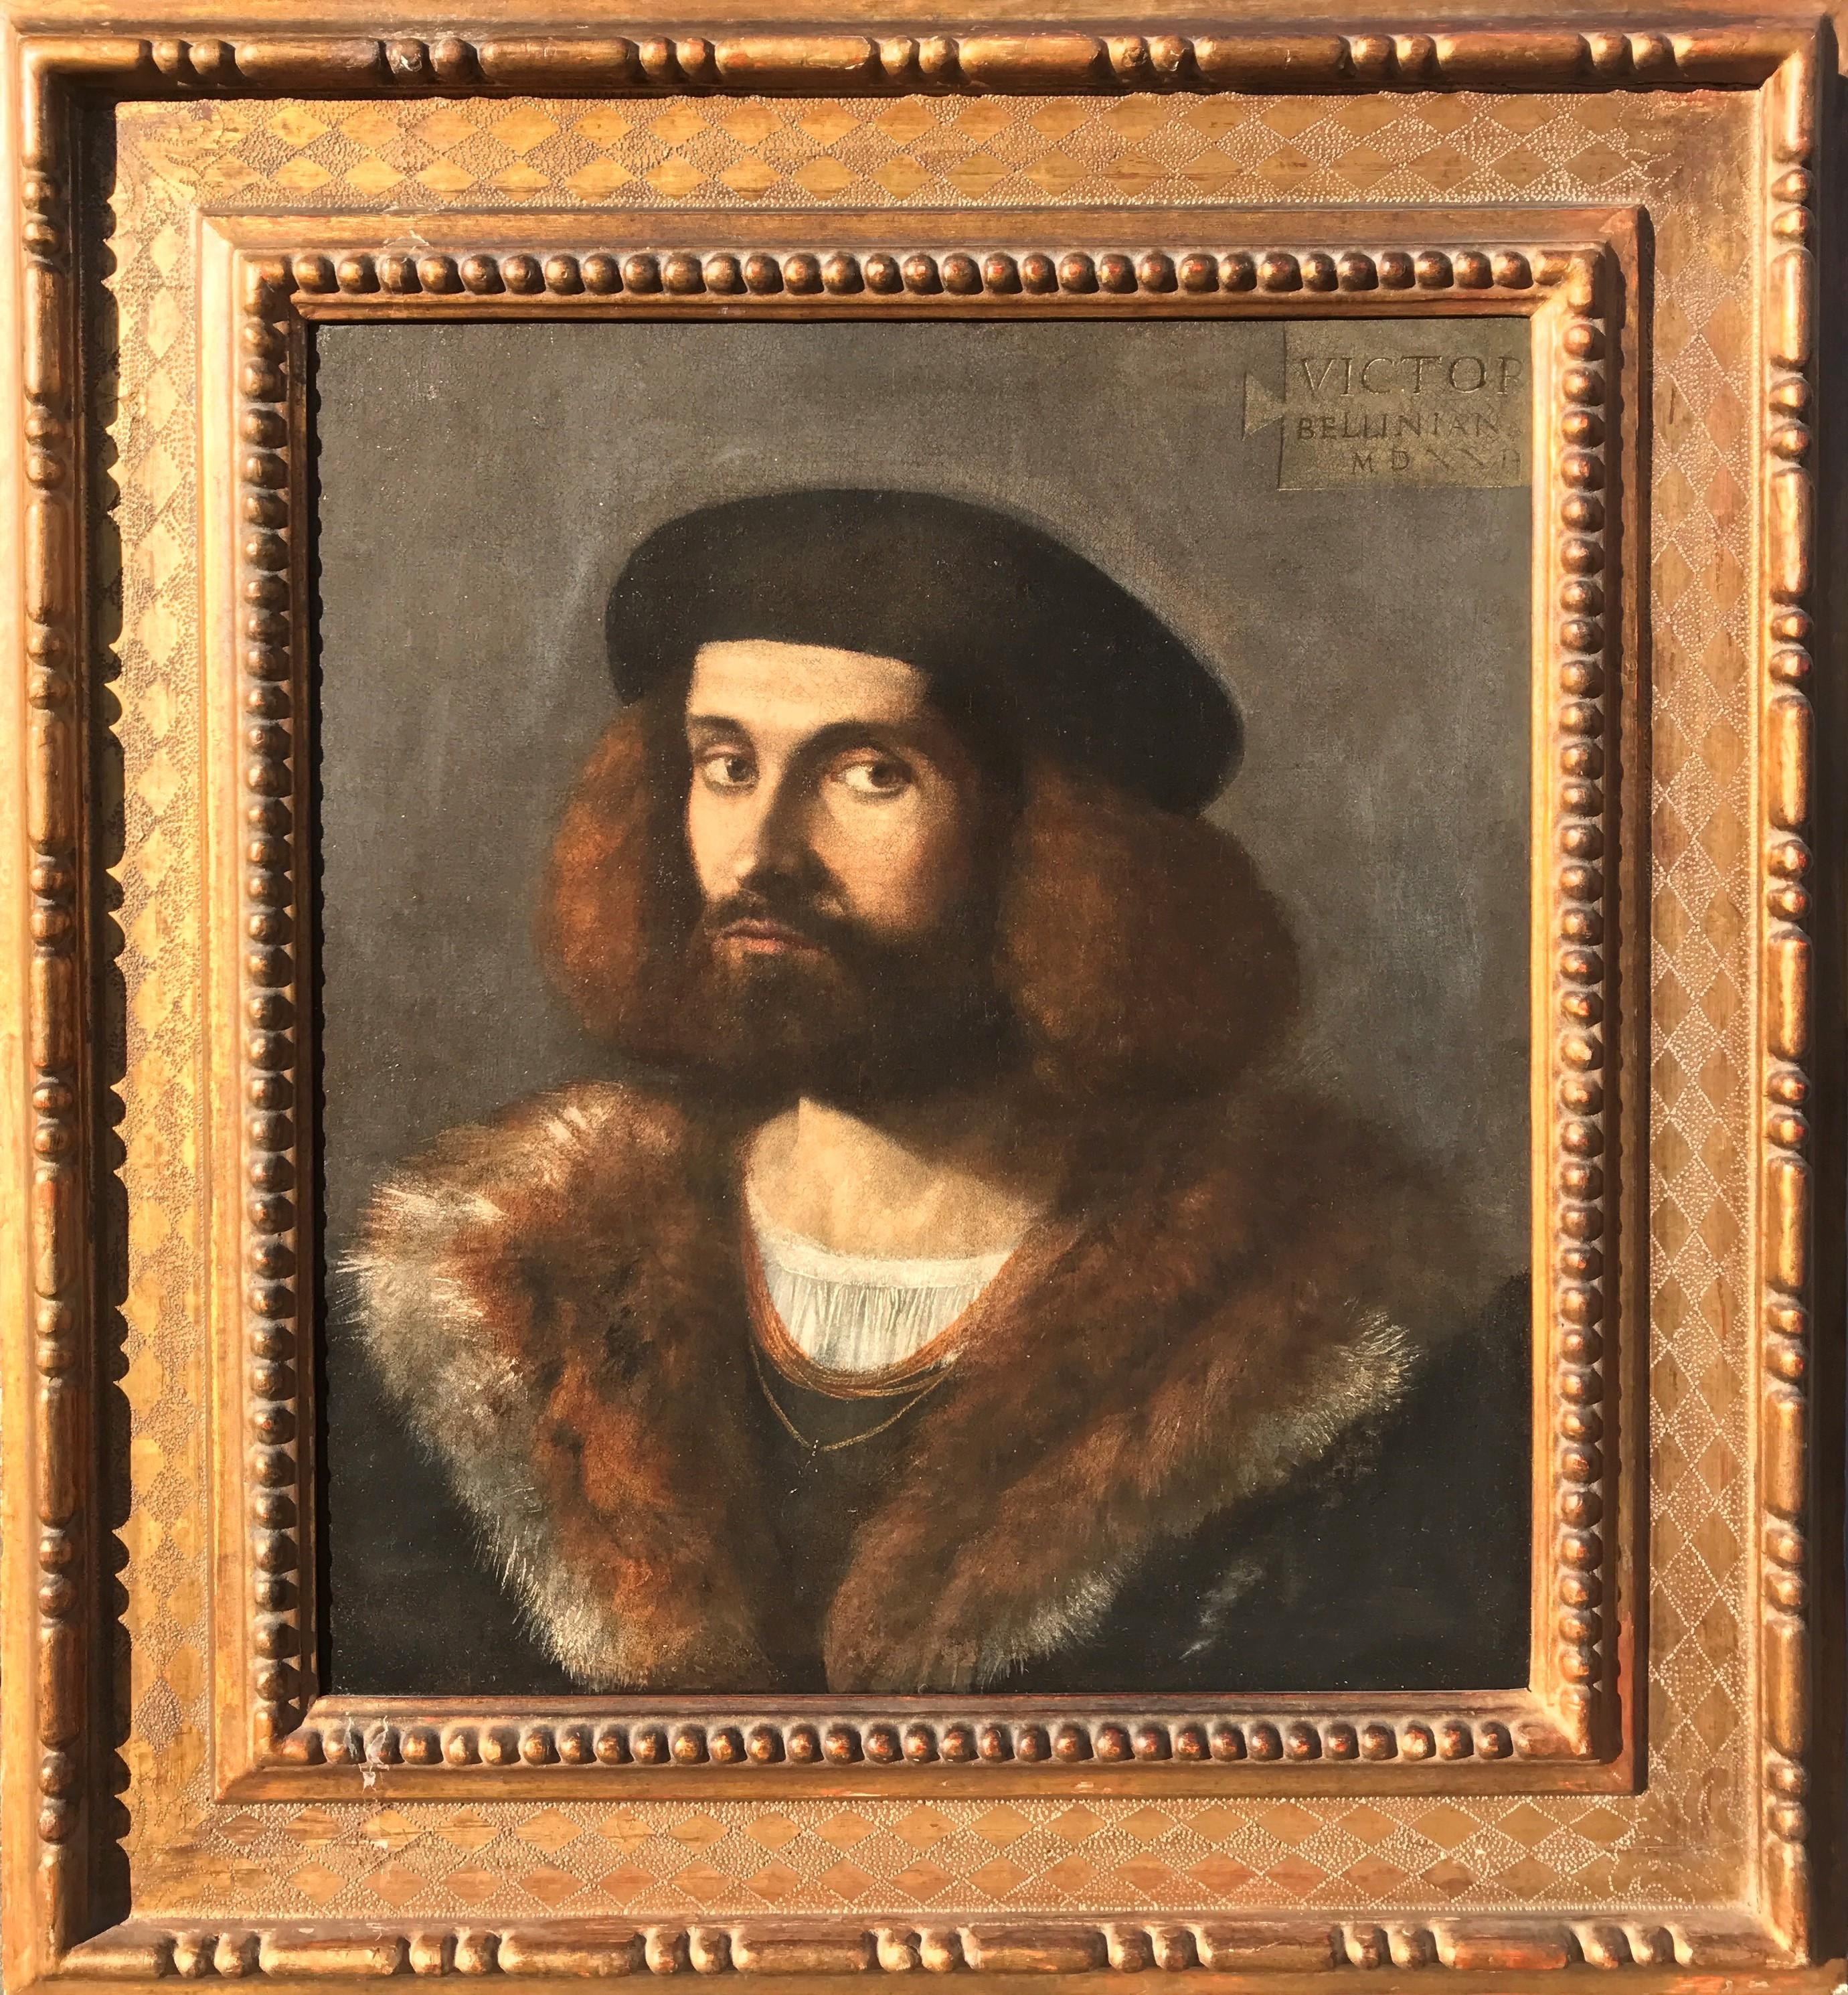 Vittore Belliniano Figurative Painting - Renaissance Old Master Portrait of a Young Bearded Man